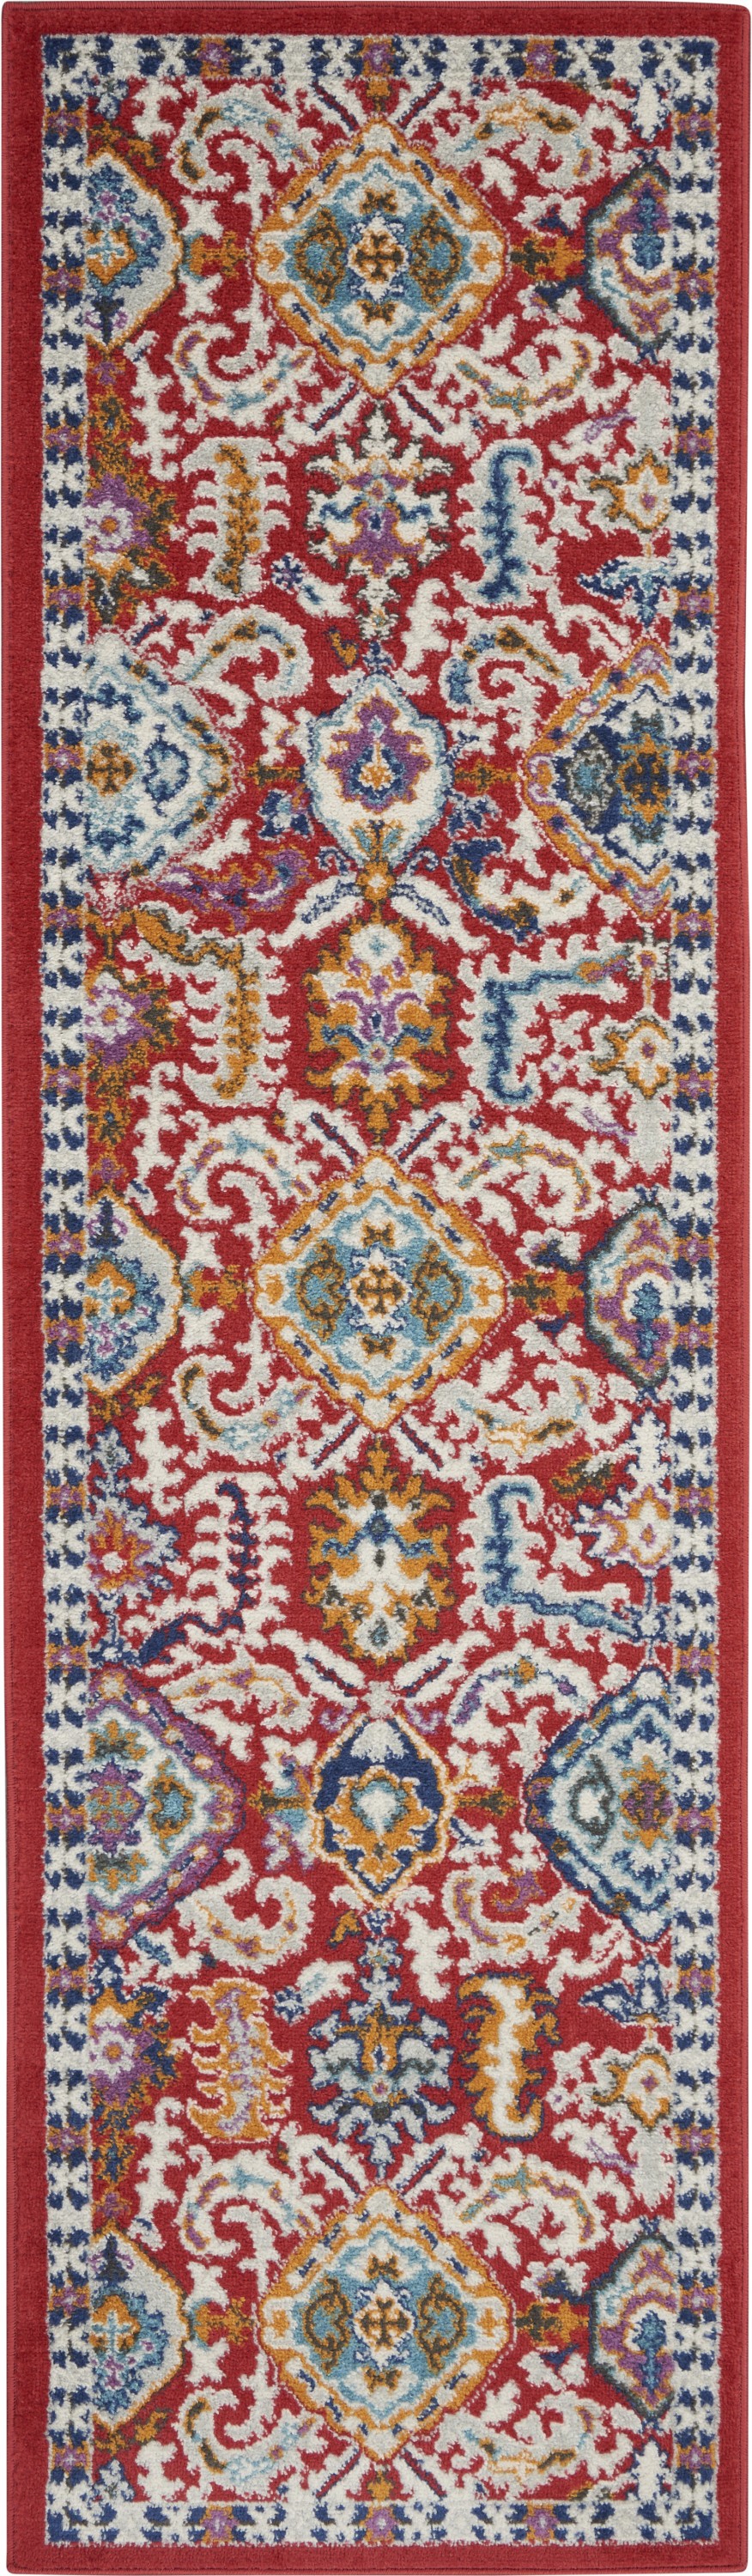 8' Red And Ivory Damask Power Loom Runner Rug-385644-1